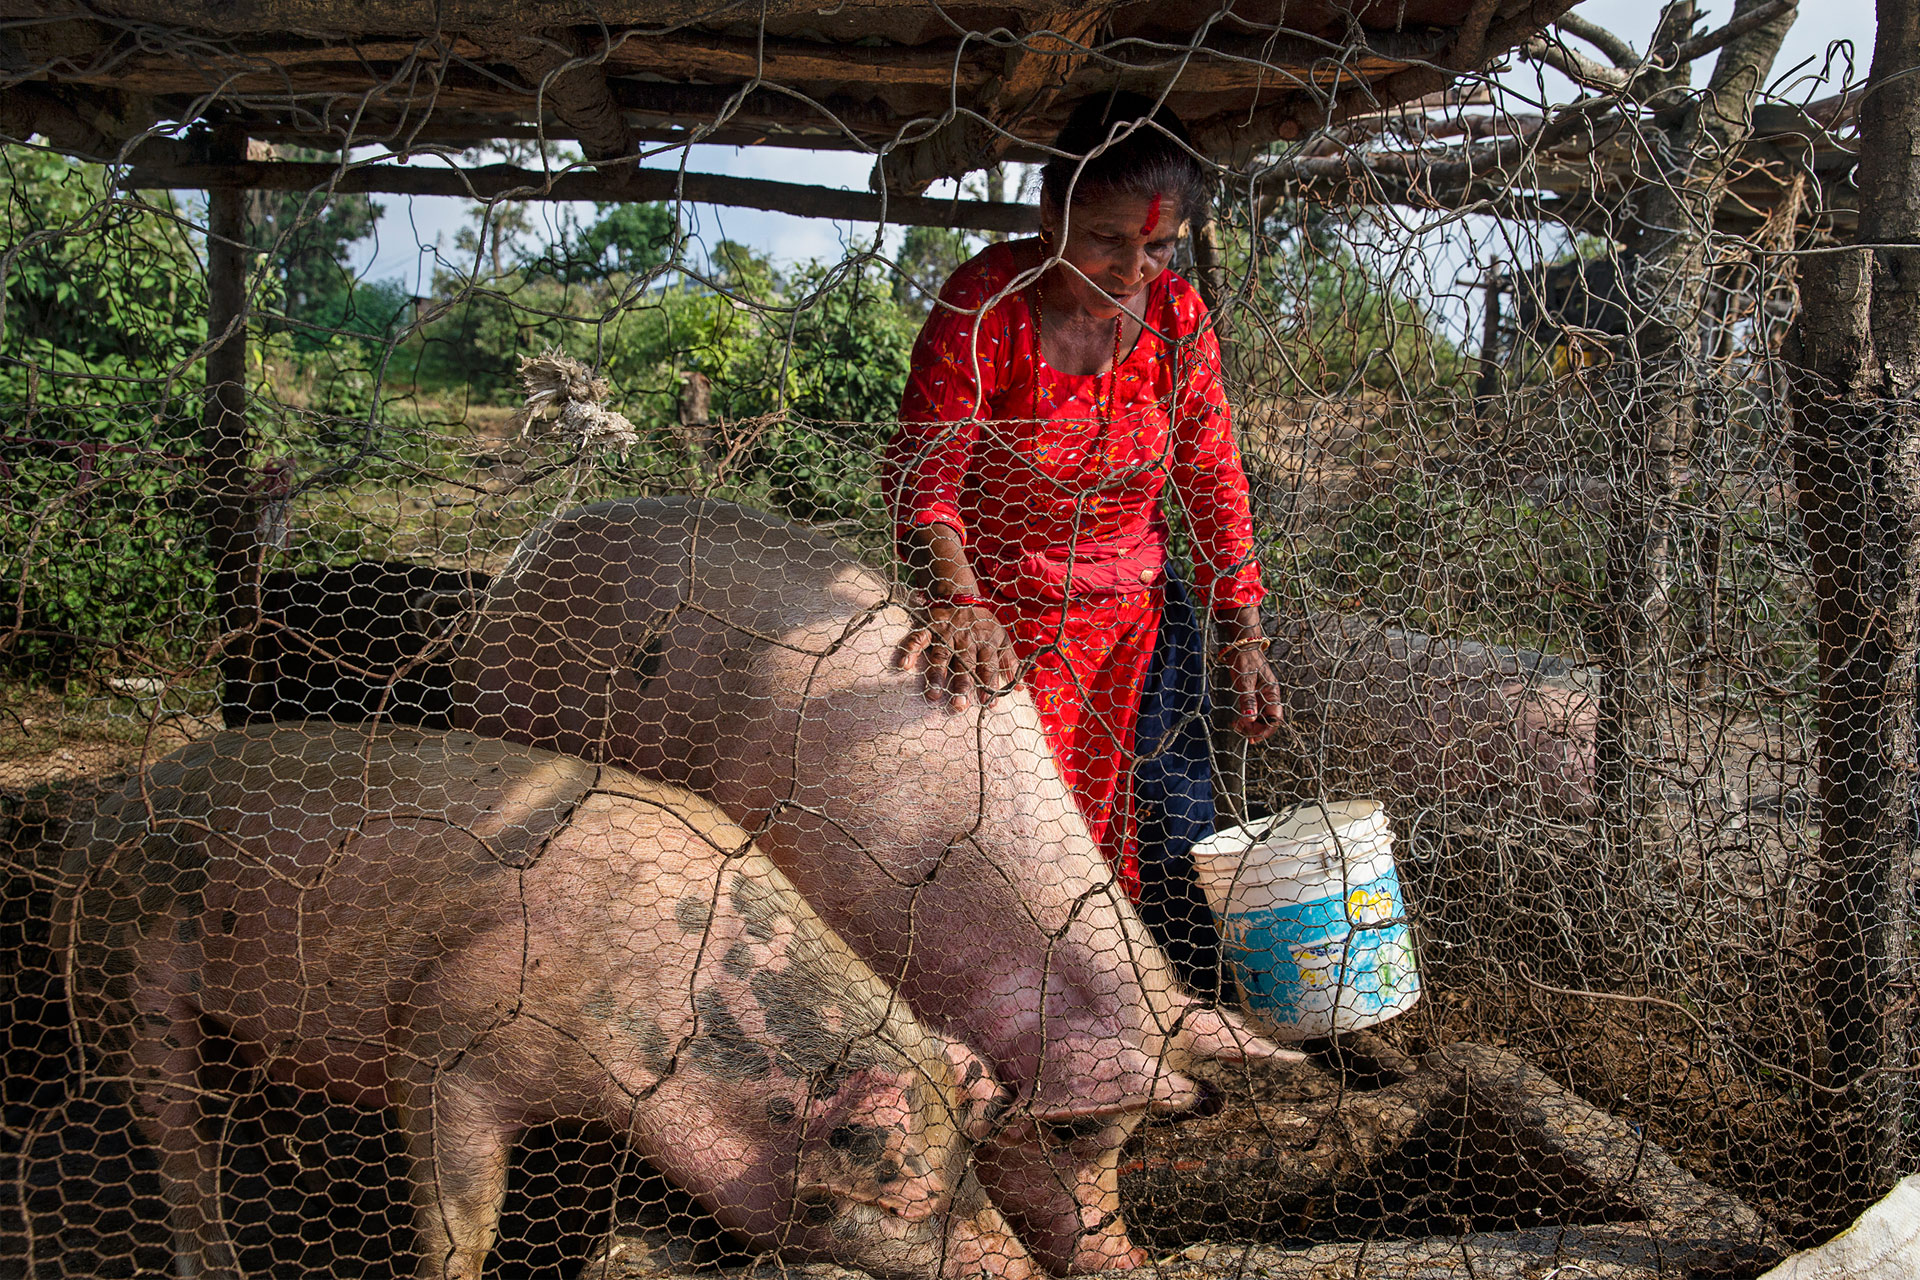 An older woman is petting her two pigs in Nepal.